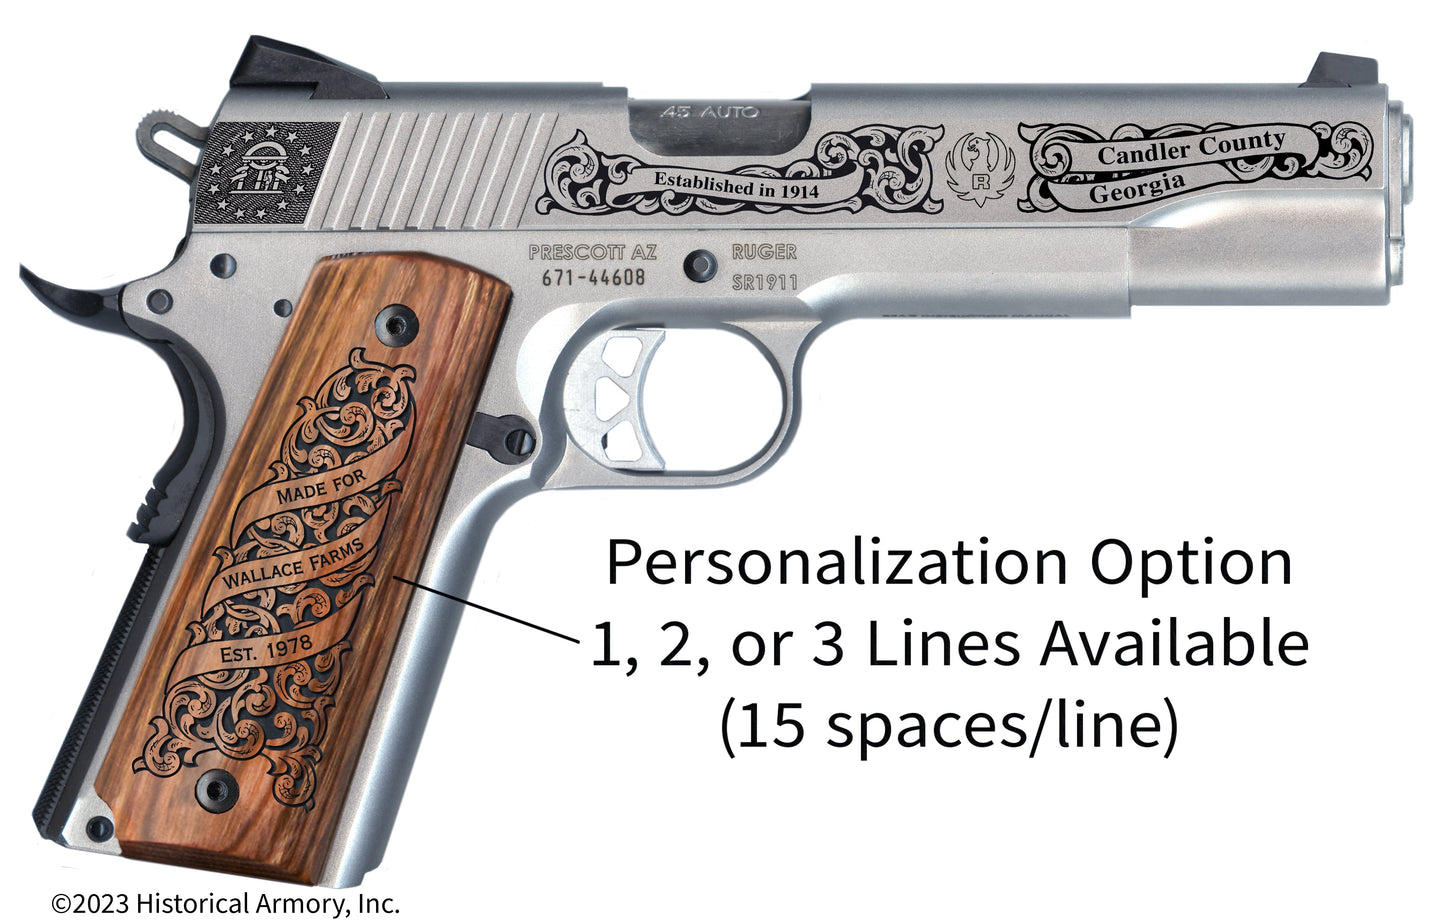 Candler County Georgia Personalized Engraved .45 Auto Ruger 1911